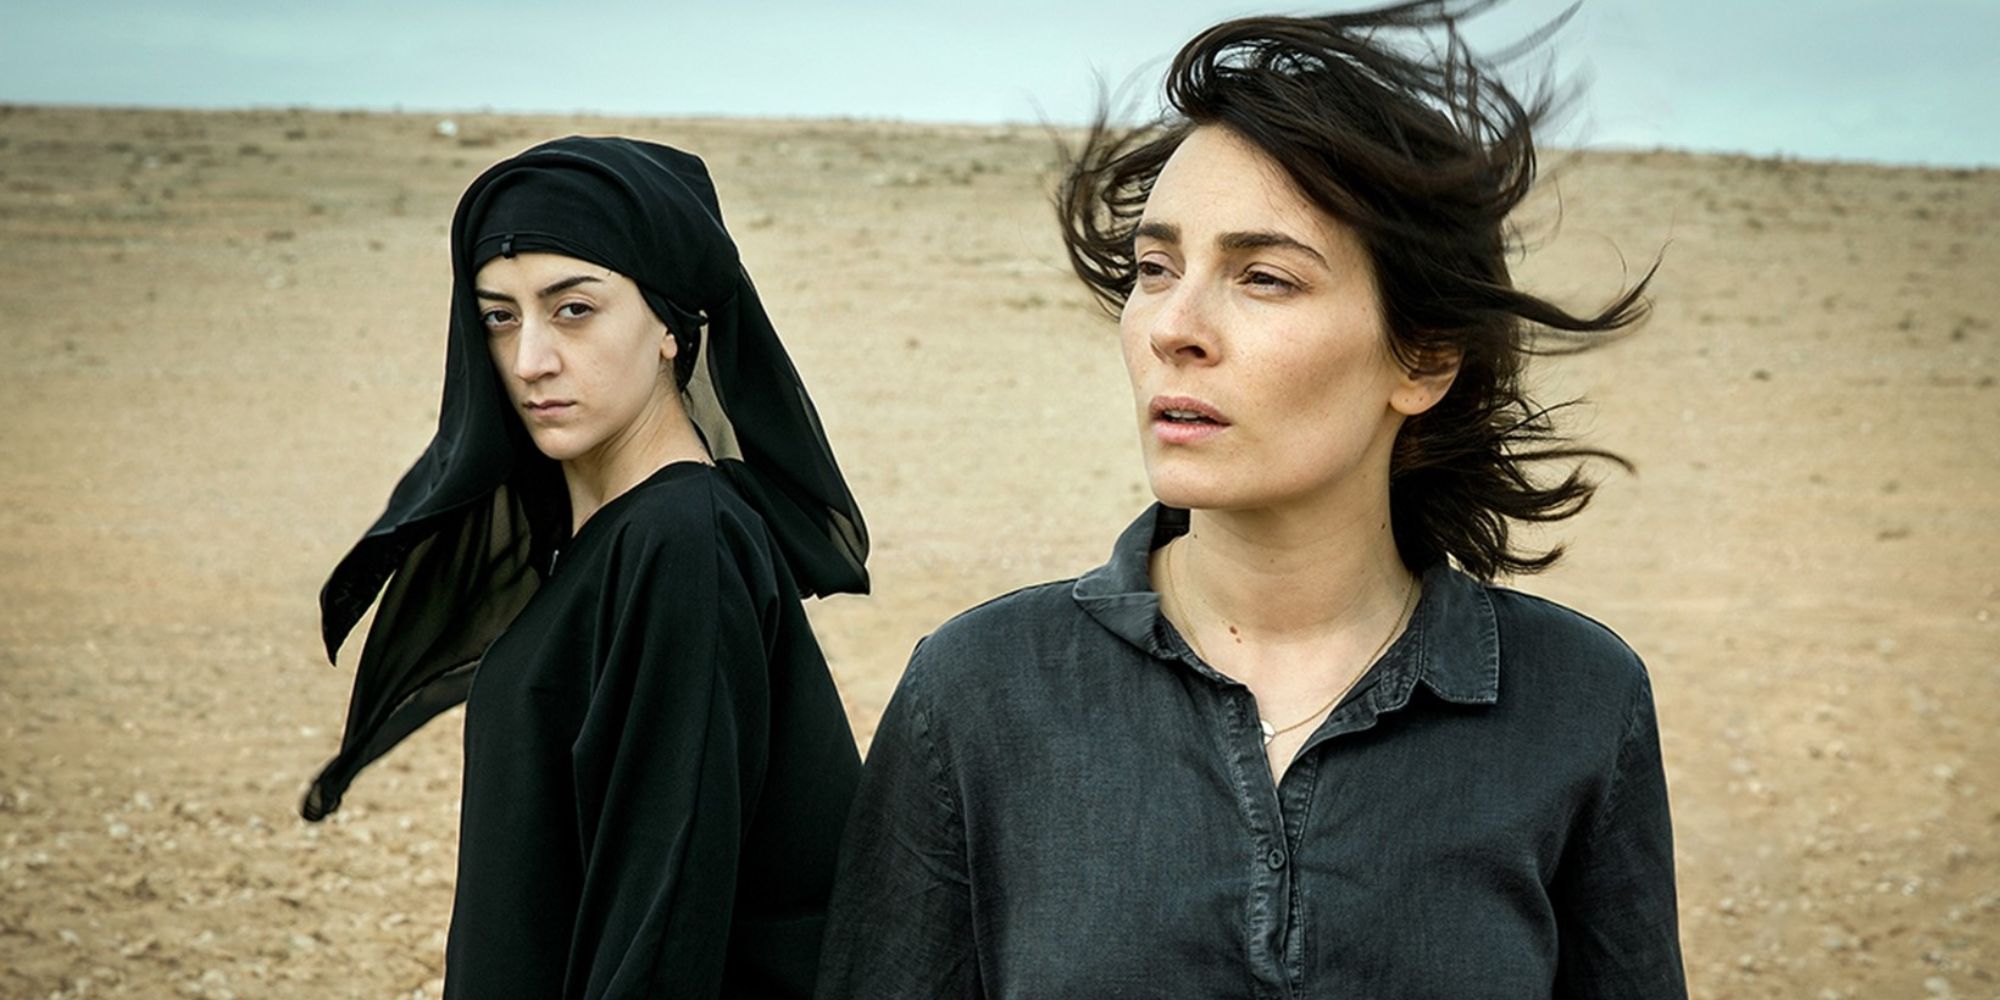 Gizem Erdogan and Aliette Opheim as Pervin and Fatima, standing in the desert in Caliphate